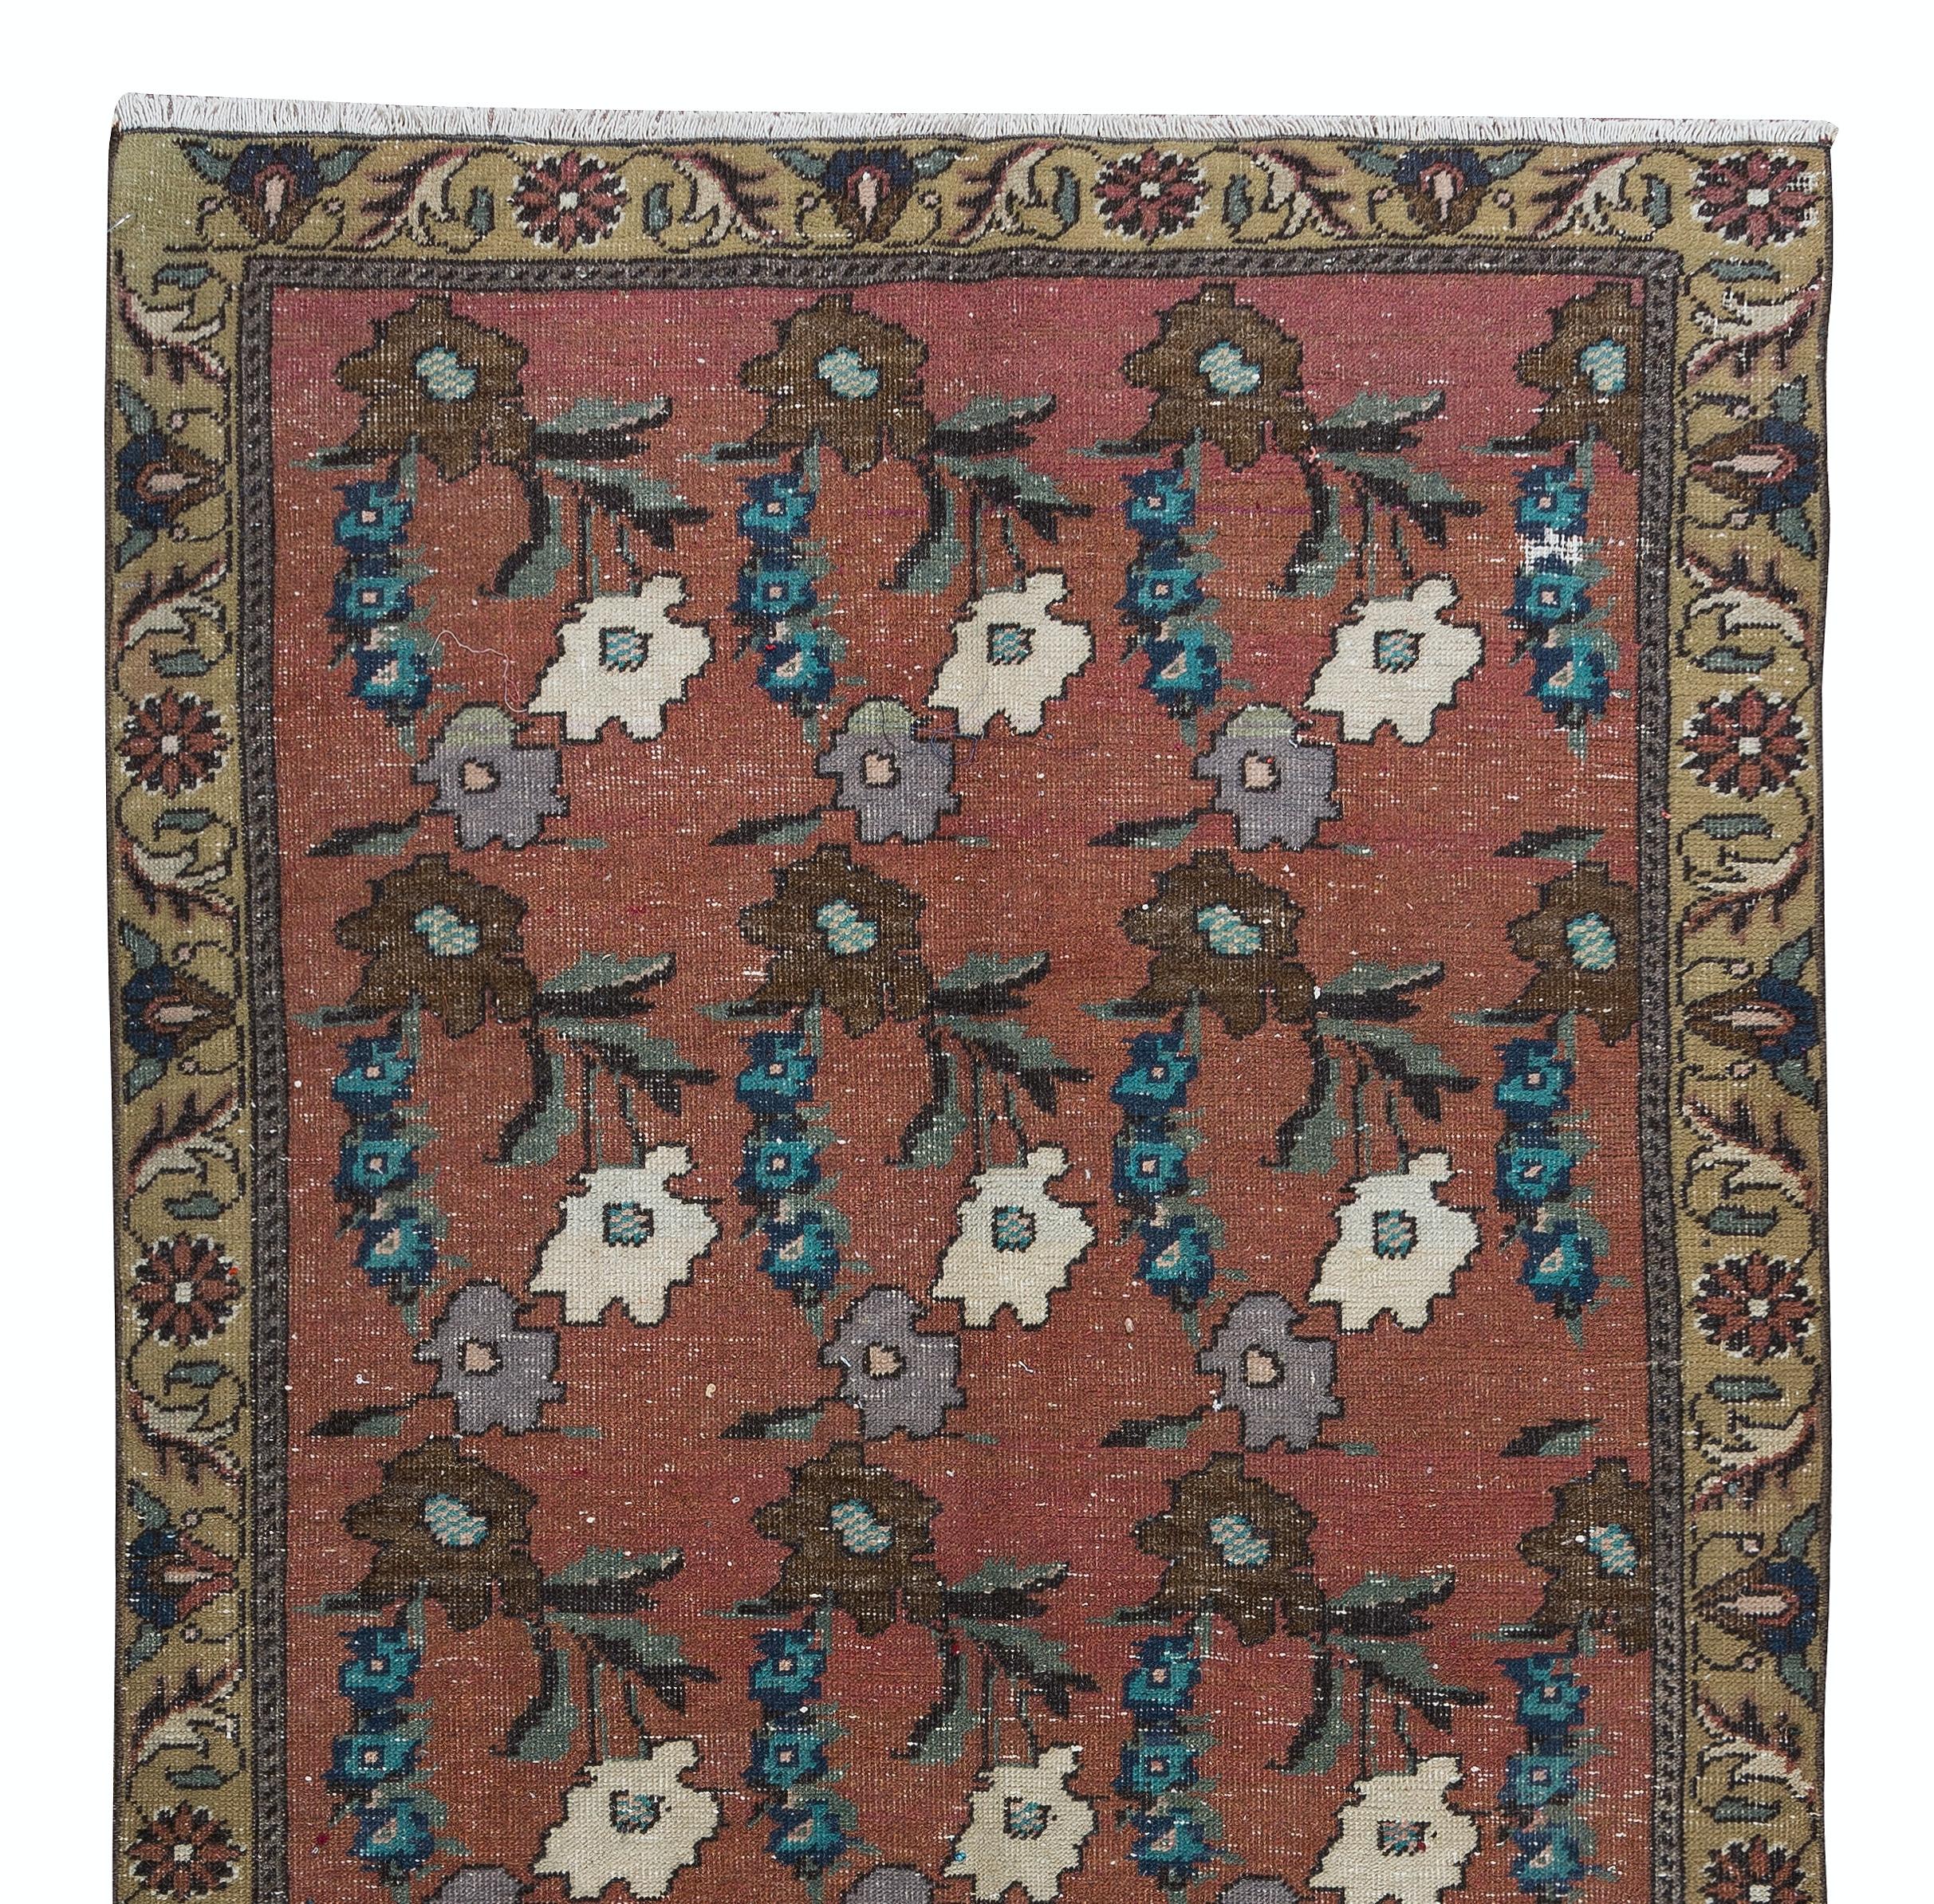 3.9x8.4 Ft Vintage Handmade Floral Patterned Turkish Rug in Red, Blue & Beige In Good Condition For Sale In Philadelphia, PA